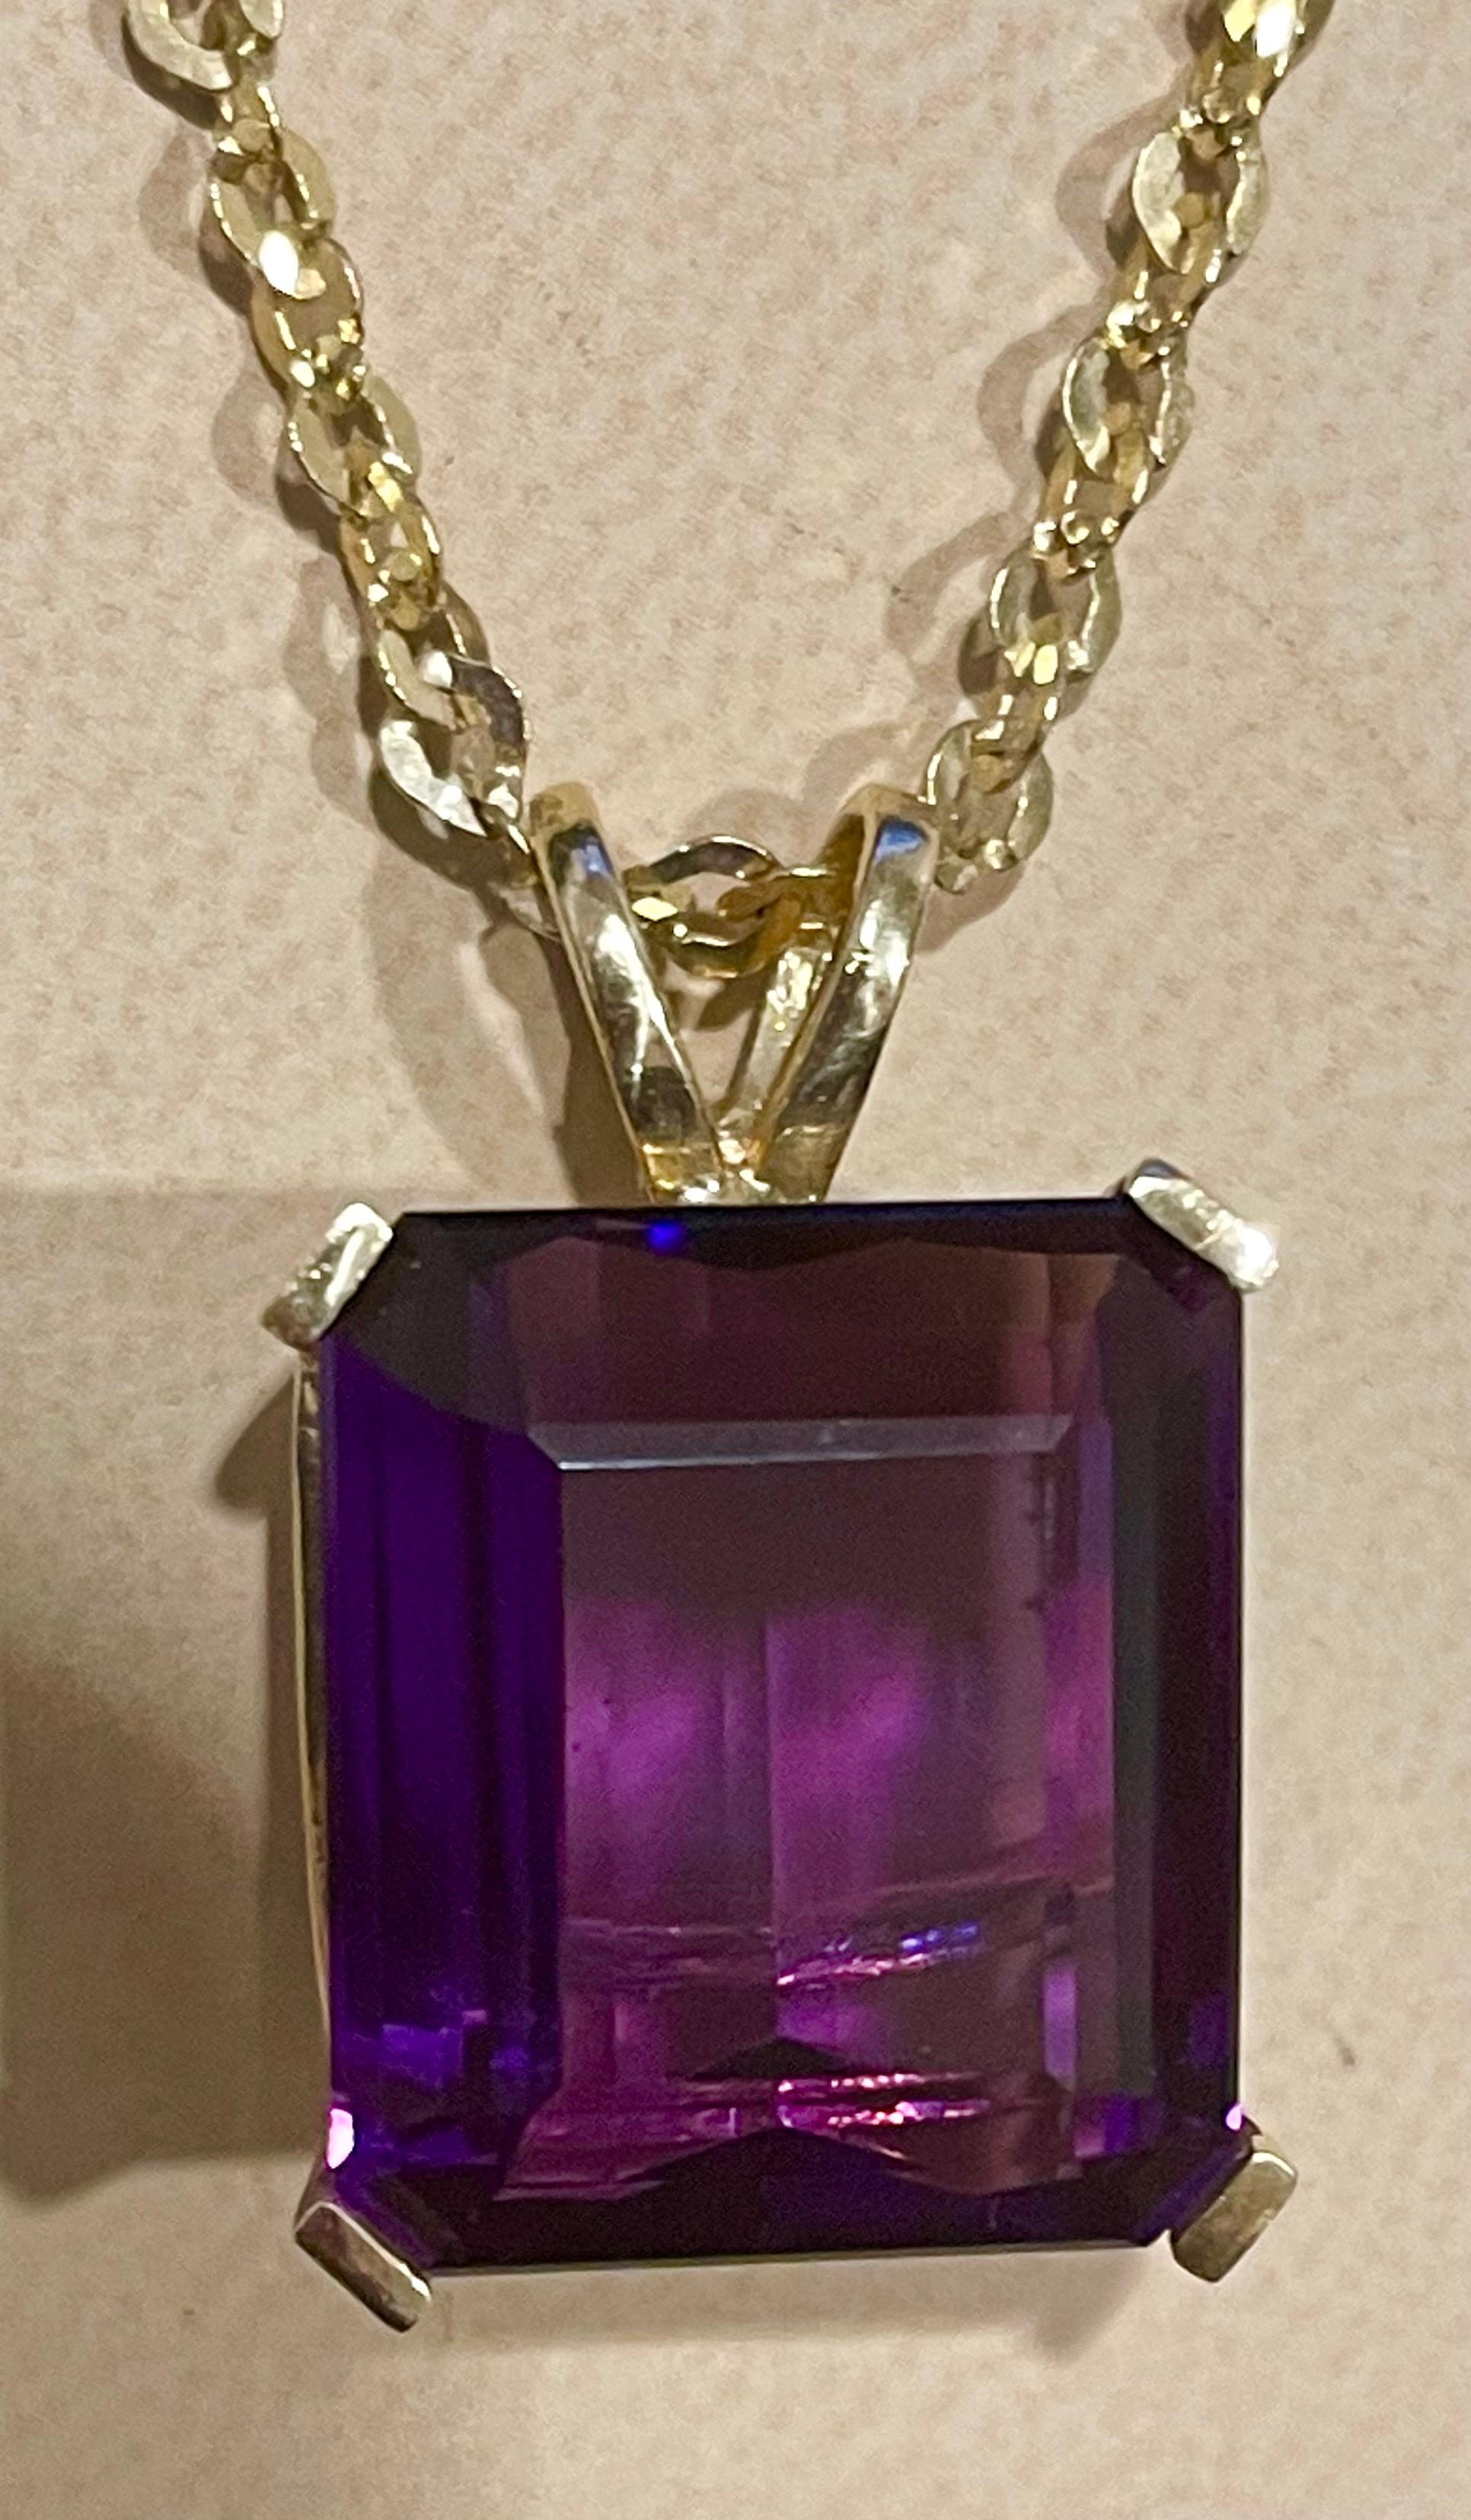 42 Ct Emerald Cut Amethyst Pendant /Necklace + 14 Kt Yellow Gold Chain Vintage 1